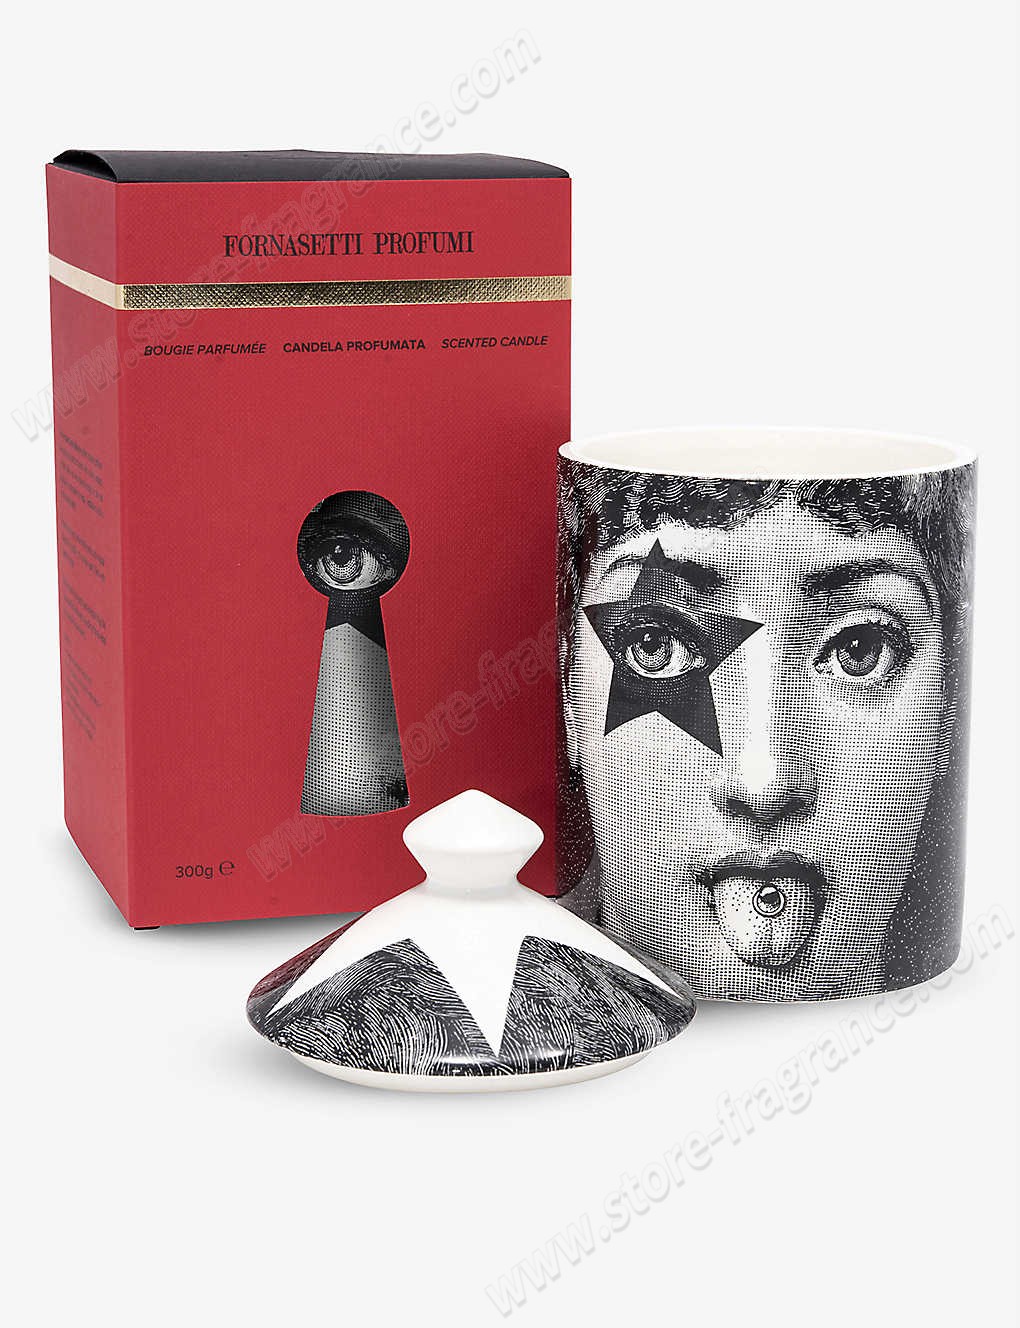 FORNASETTI/Star Lina scented candle 300g ✿ Discount Store - -1